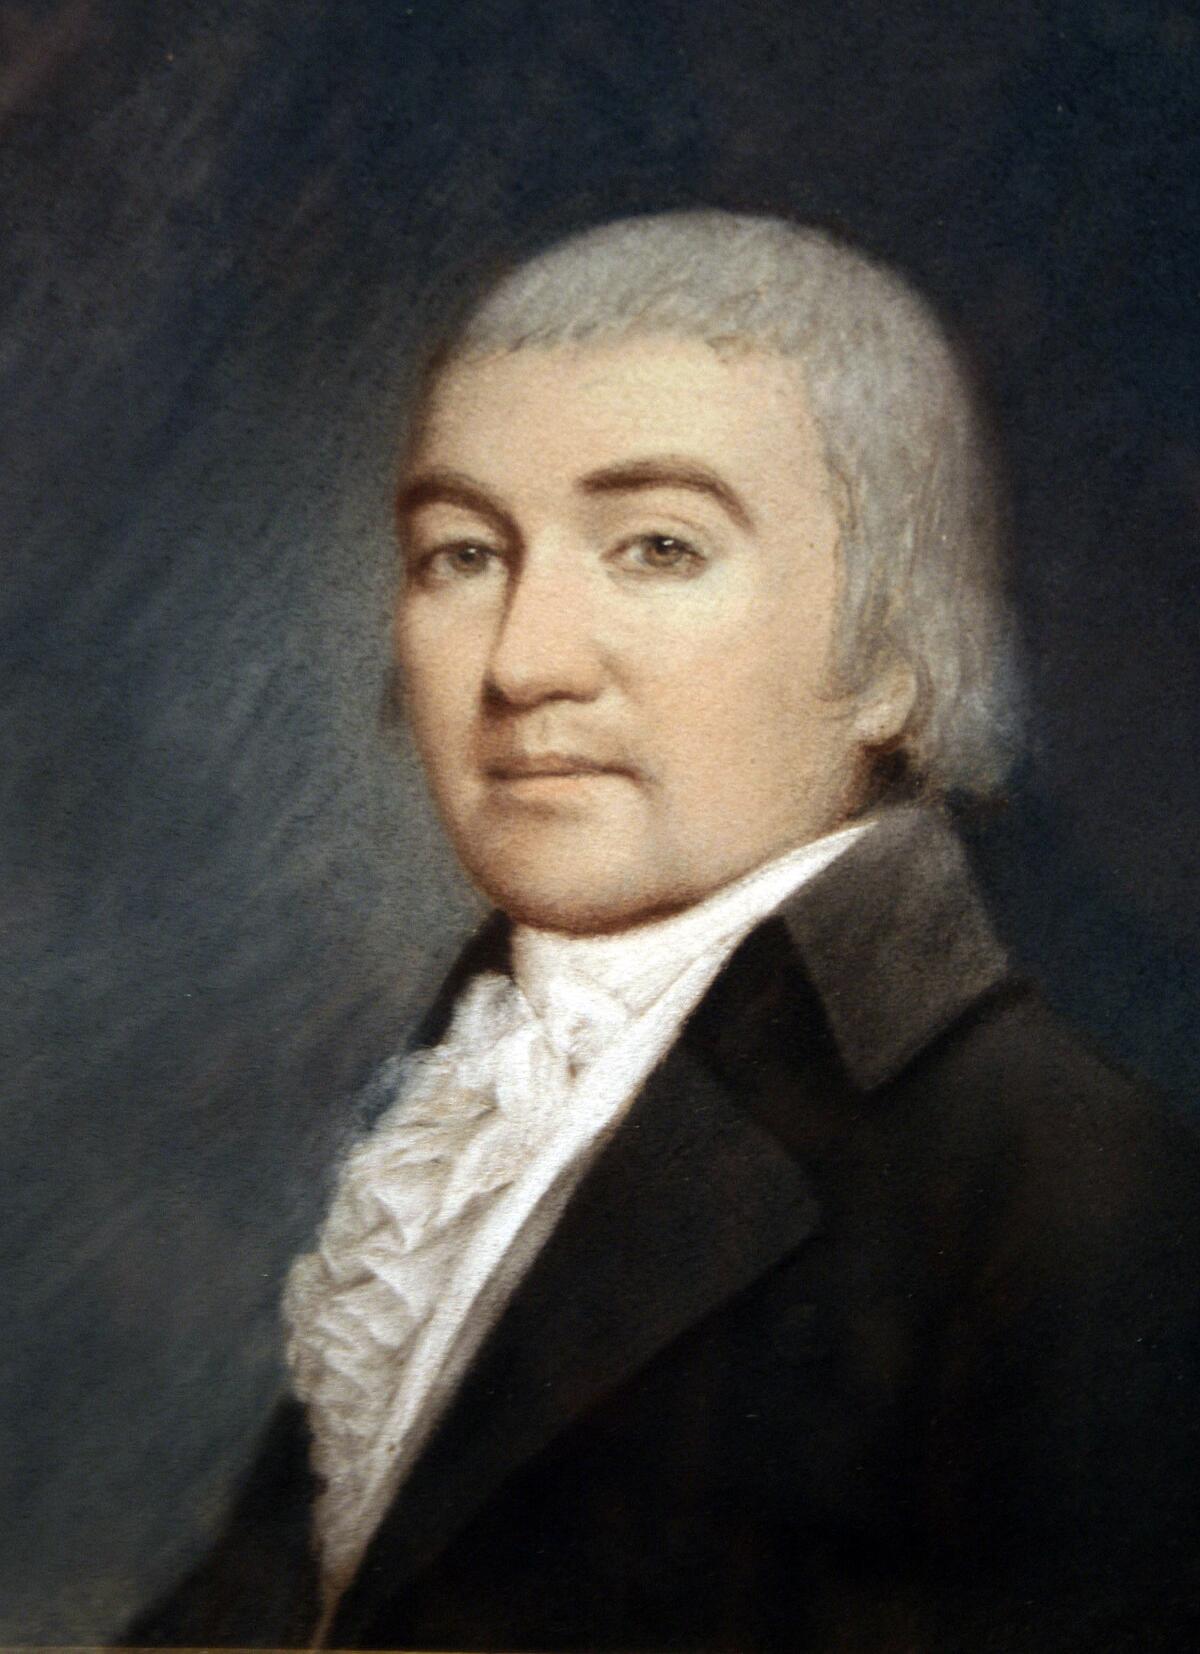 This image provided by Yale University is an early portrait of Noah Webster ca. 1798.